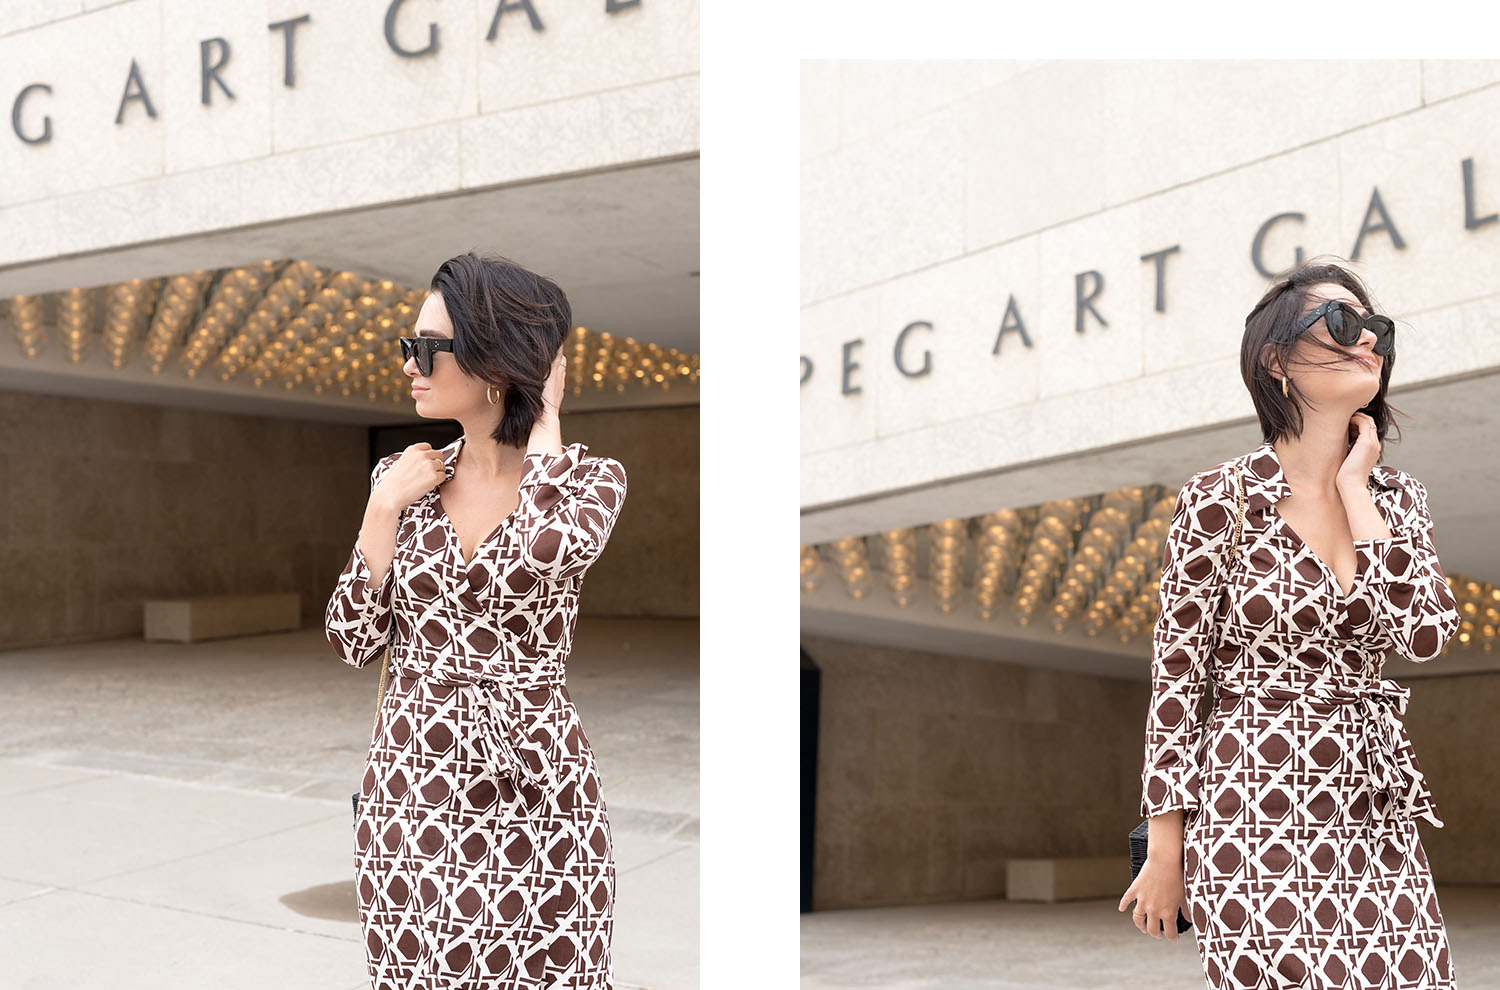 Portrait of top Canadian fashion blogger Cee Fardoe of Coco & Vera at the Winnipeg Art Gallery, wearing Celine Audrey sunglasses and a DVF wrap dress